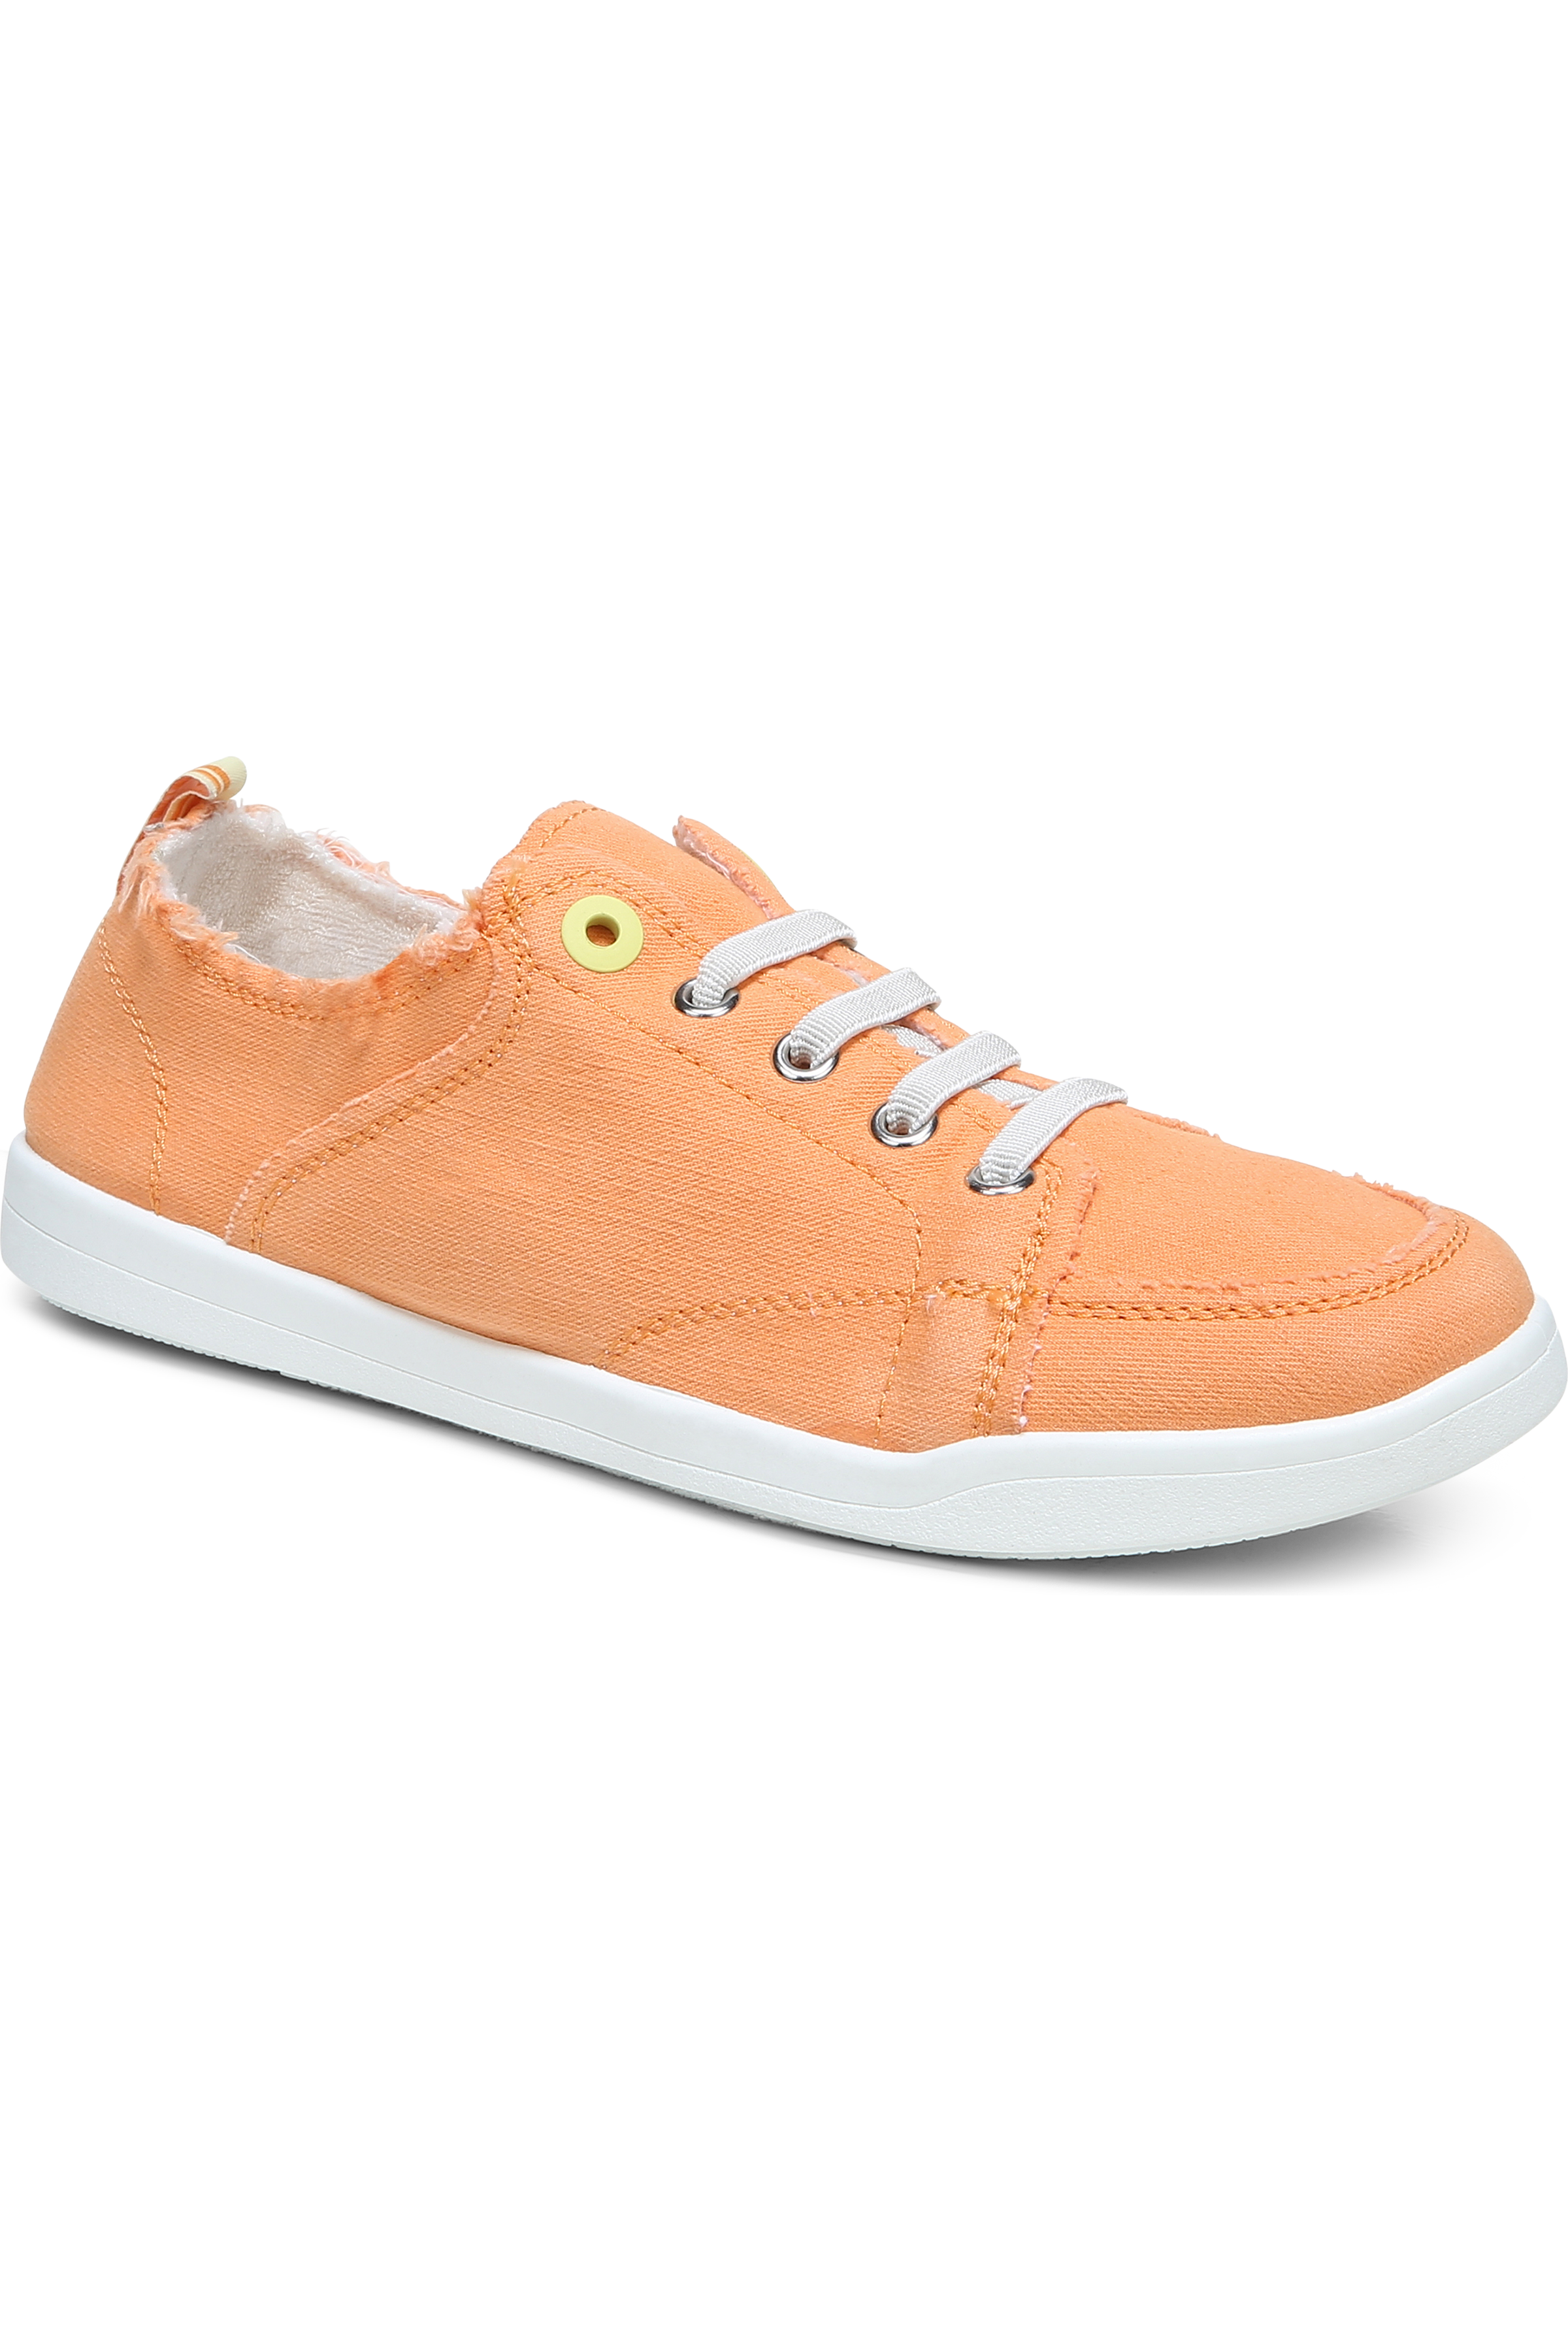 Vionic Venice Canvas Sneakers - Style Pismo, front angle, melon